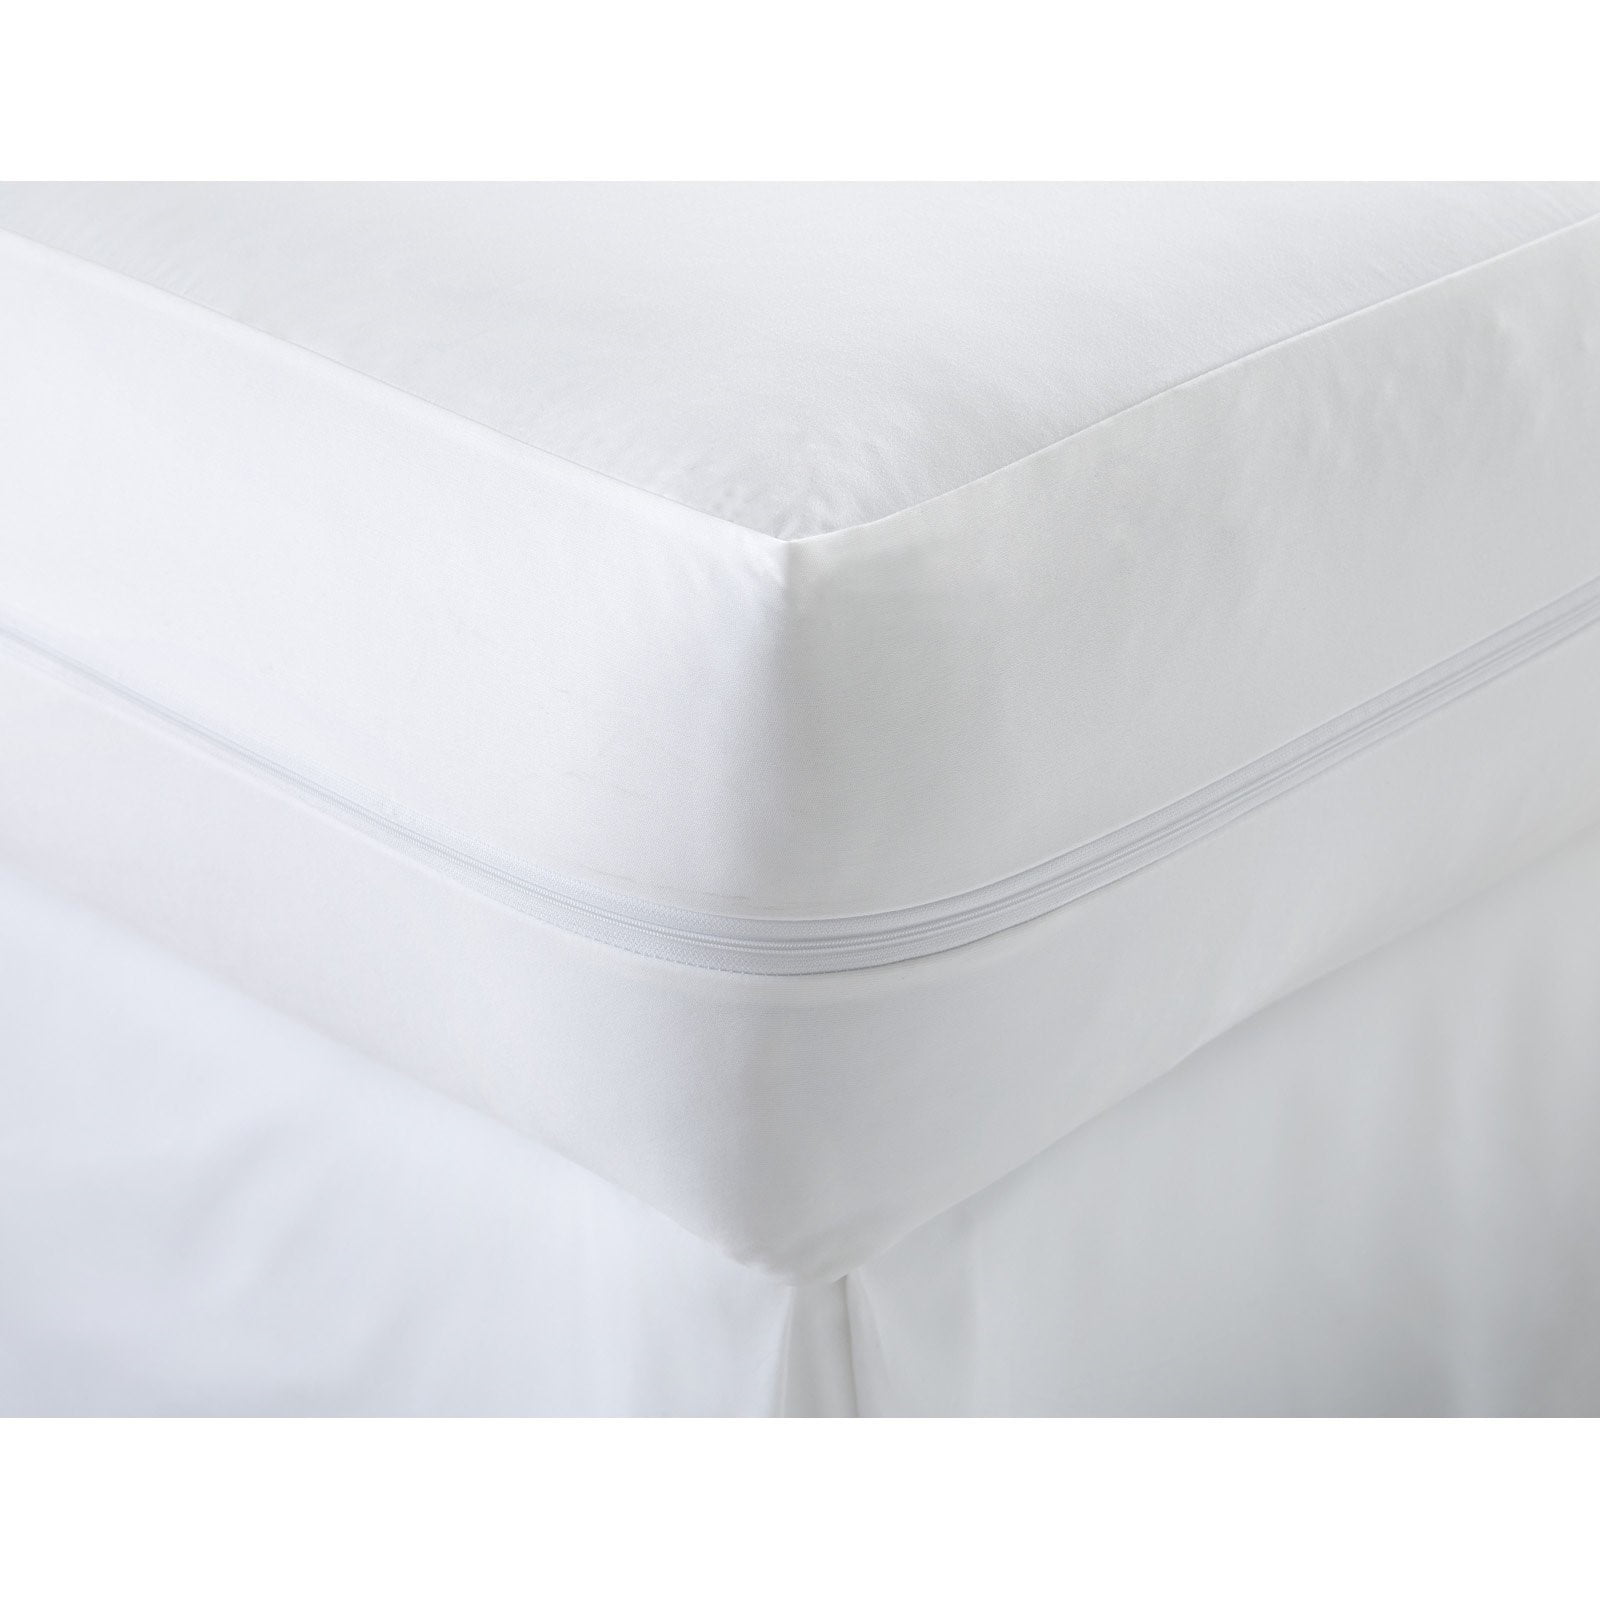 SureGuard Crib Size Mattress Protector - Premium Fitted Cotton Terry Cover